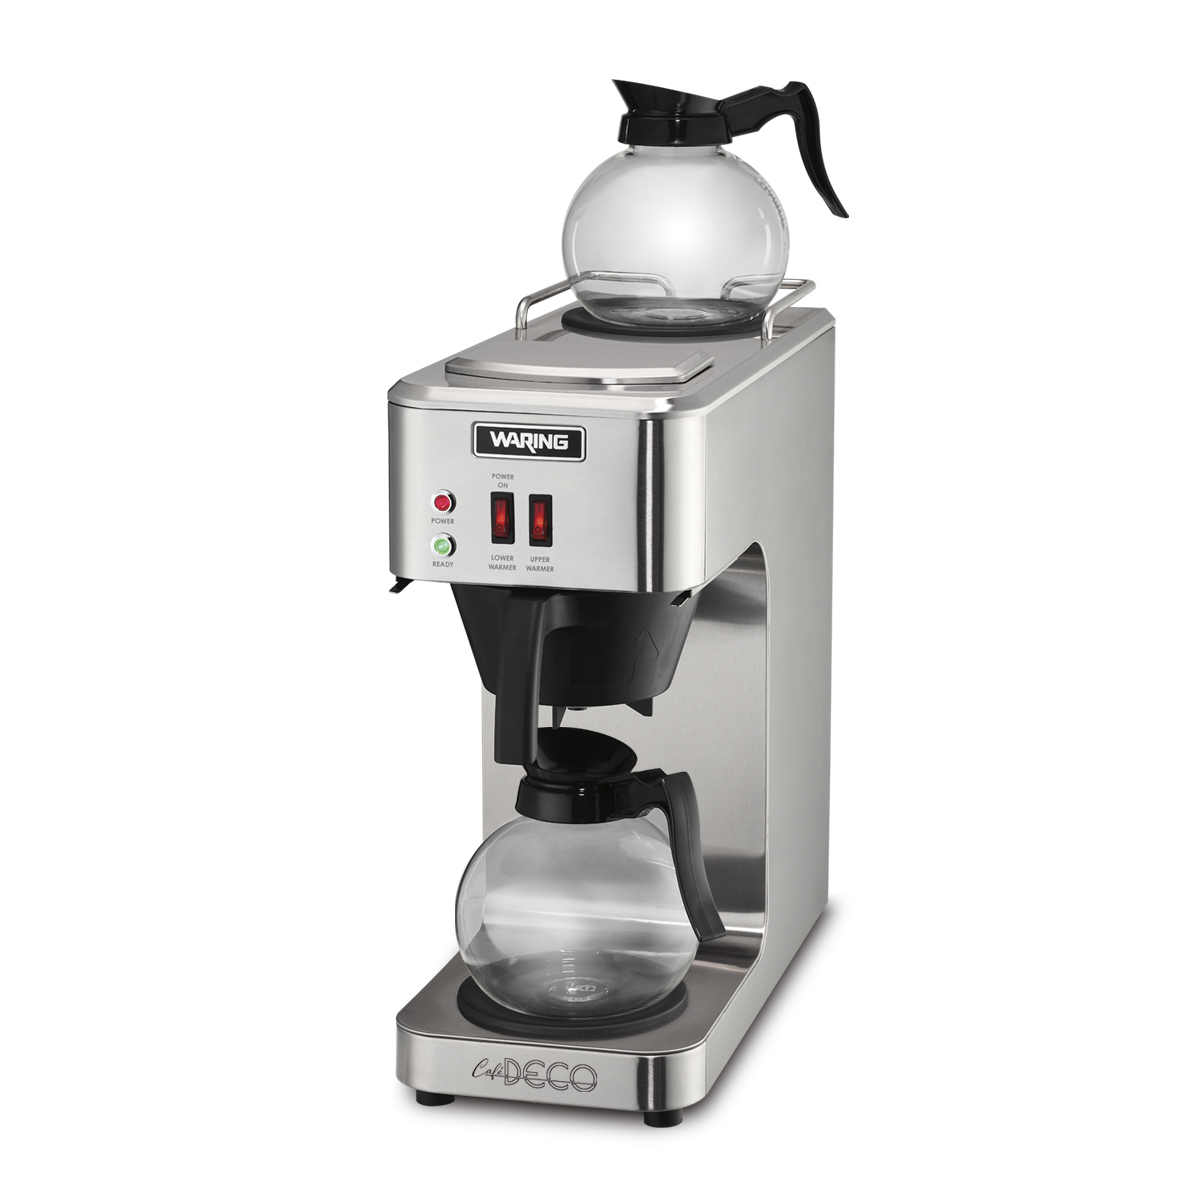 https://www.waringcommercialproducts.com/files/products/wcm50-waring-cafe-deco-pour-over-coffee-brewer-inset-2-1200x1200.jpg